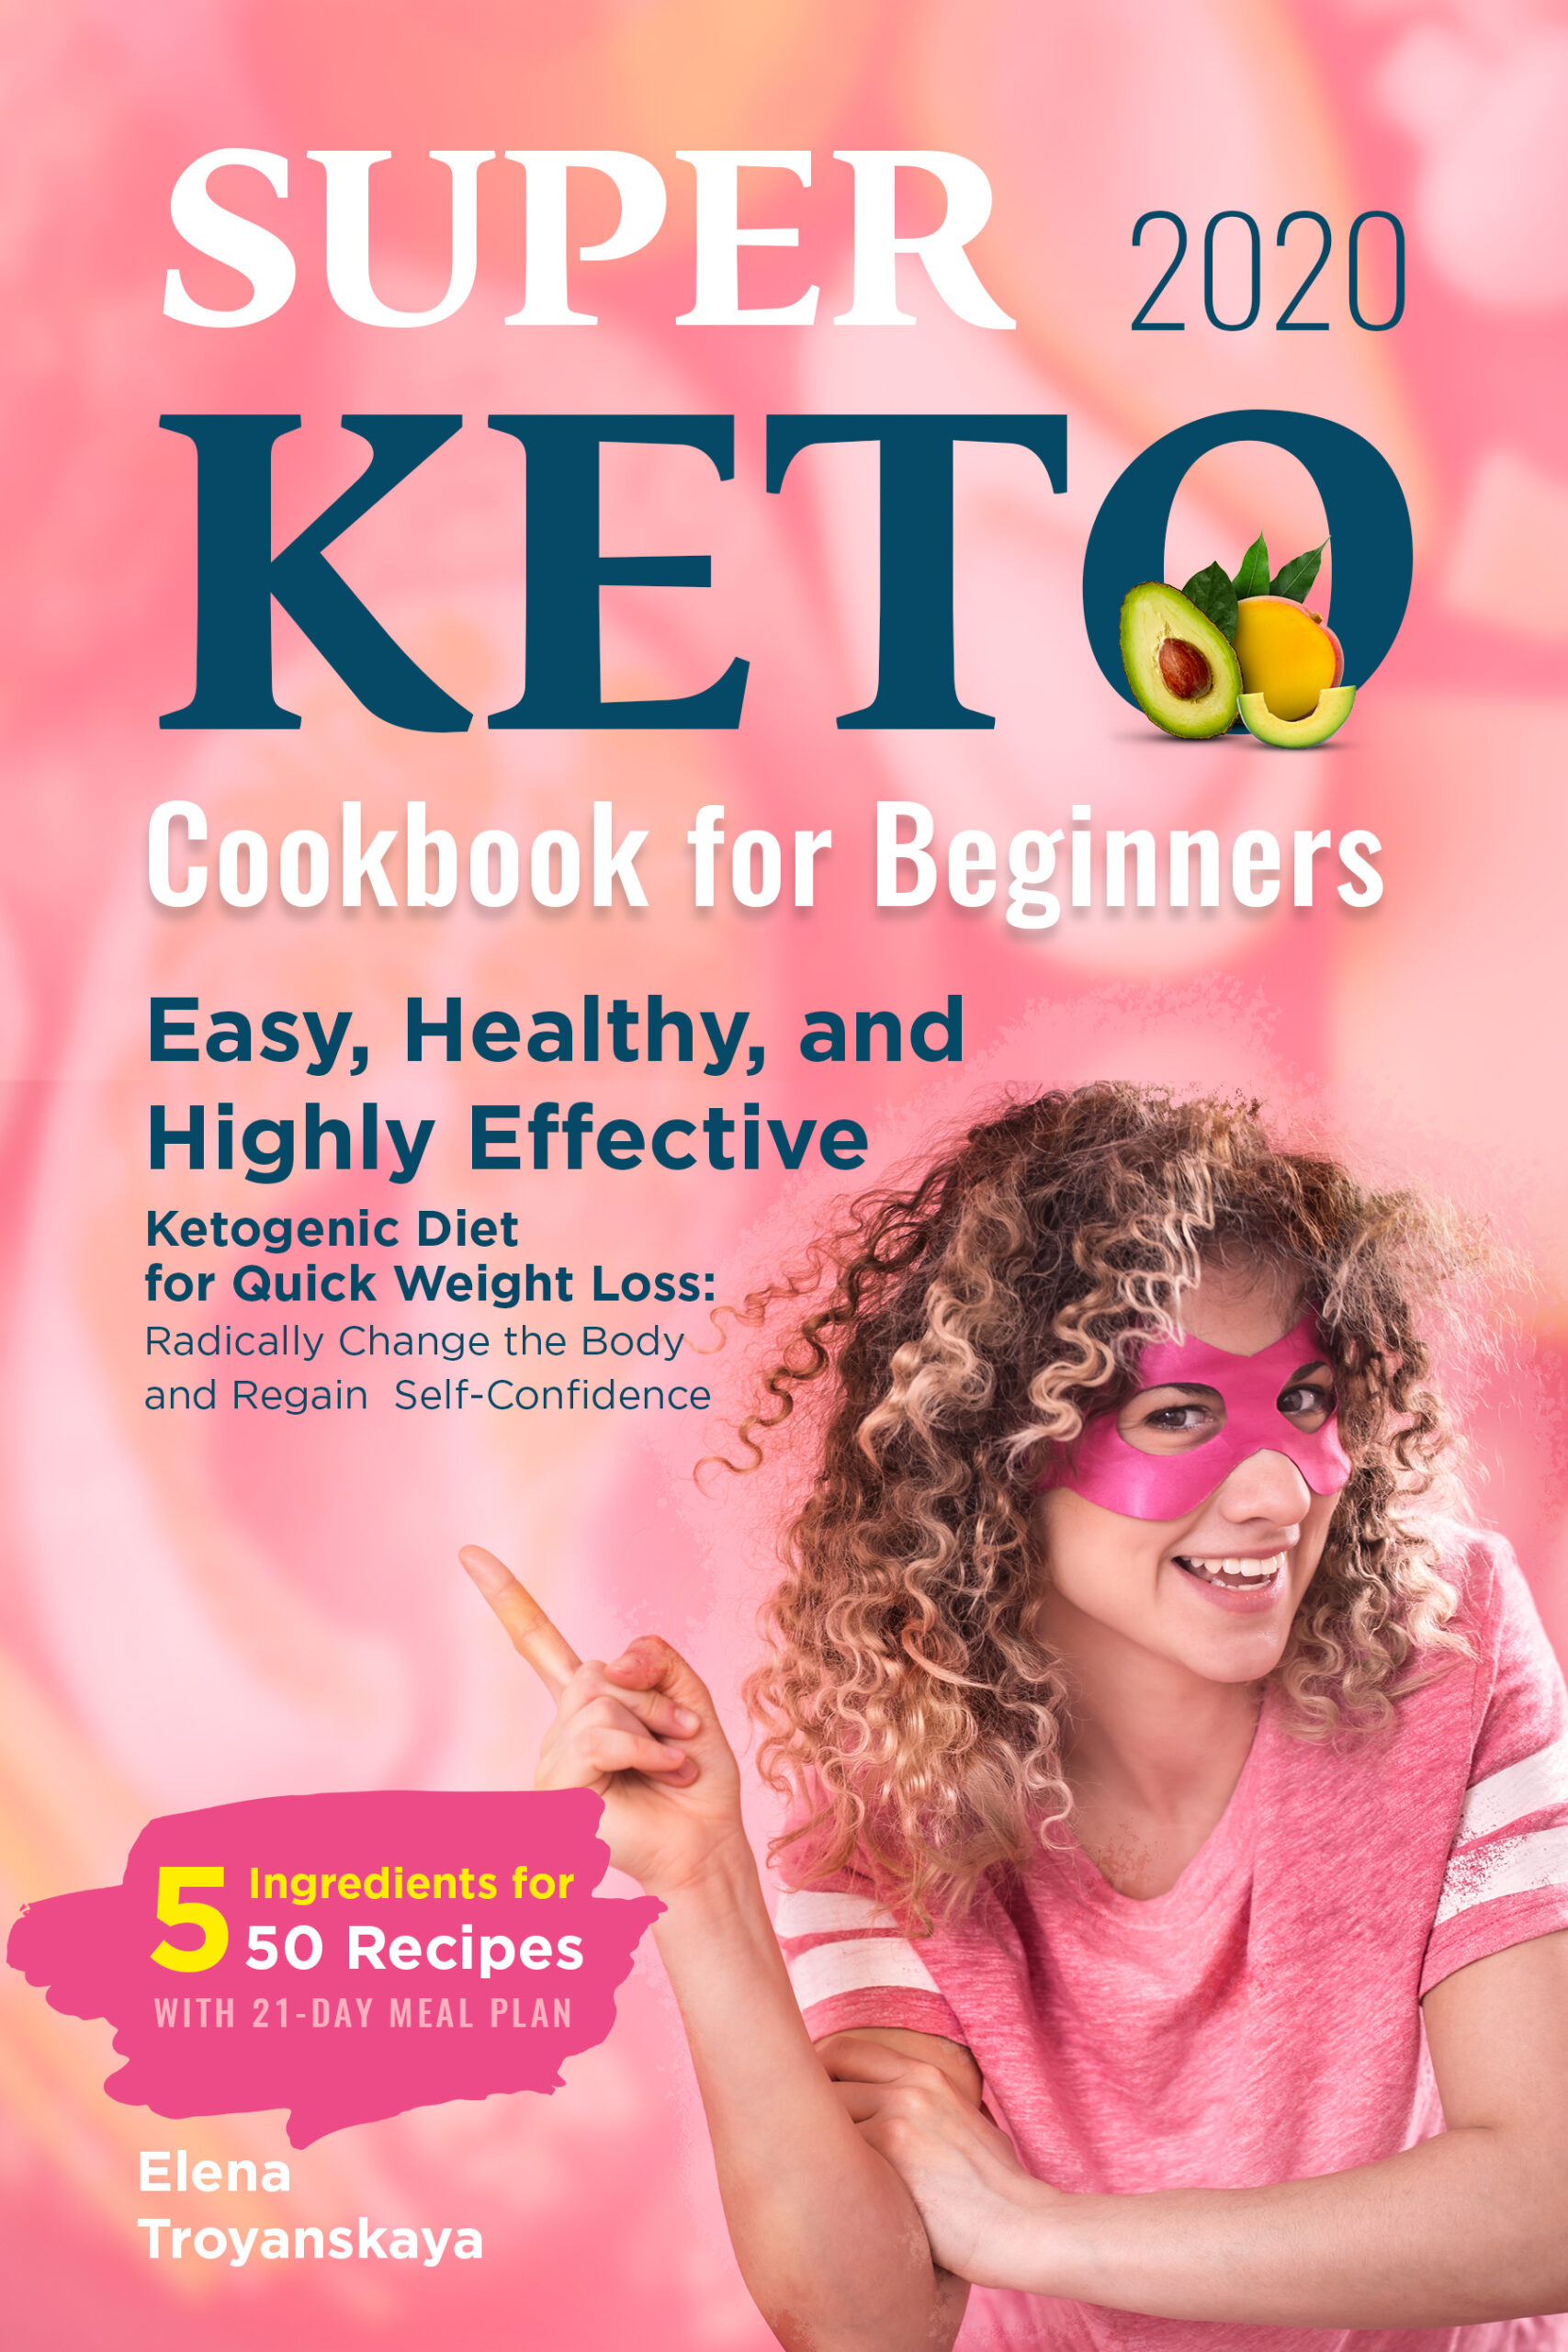 FREE: Super Keto Cookbook for Beginners 2020: Easy, Healthy, and Highly Effective Ketogenic Diet for Quick Weight Loss: Radically Change the Body and Regain Self-Confidence (5 Ingredients for 50 Recipes) by Elena Troyanskaya by Elena Troyanskaya